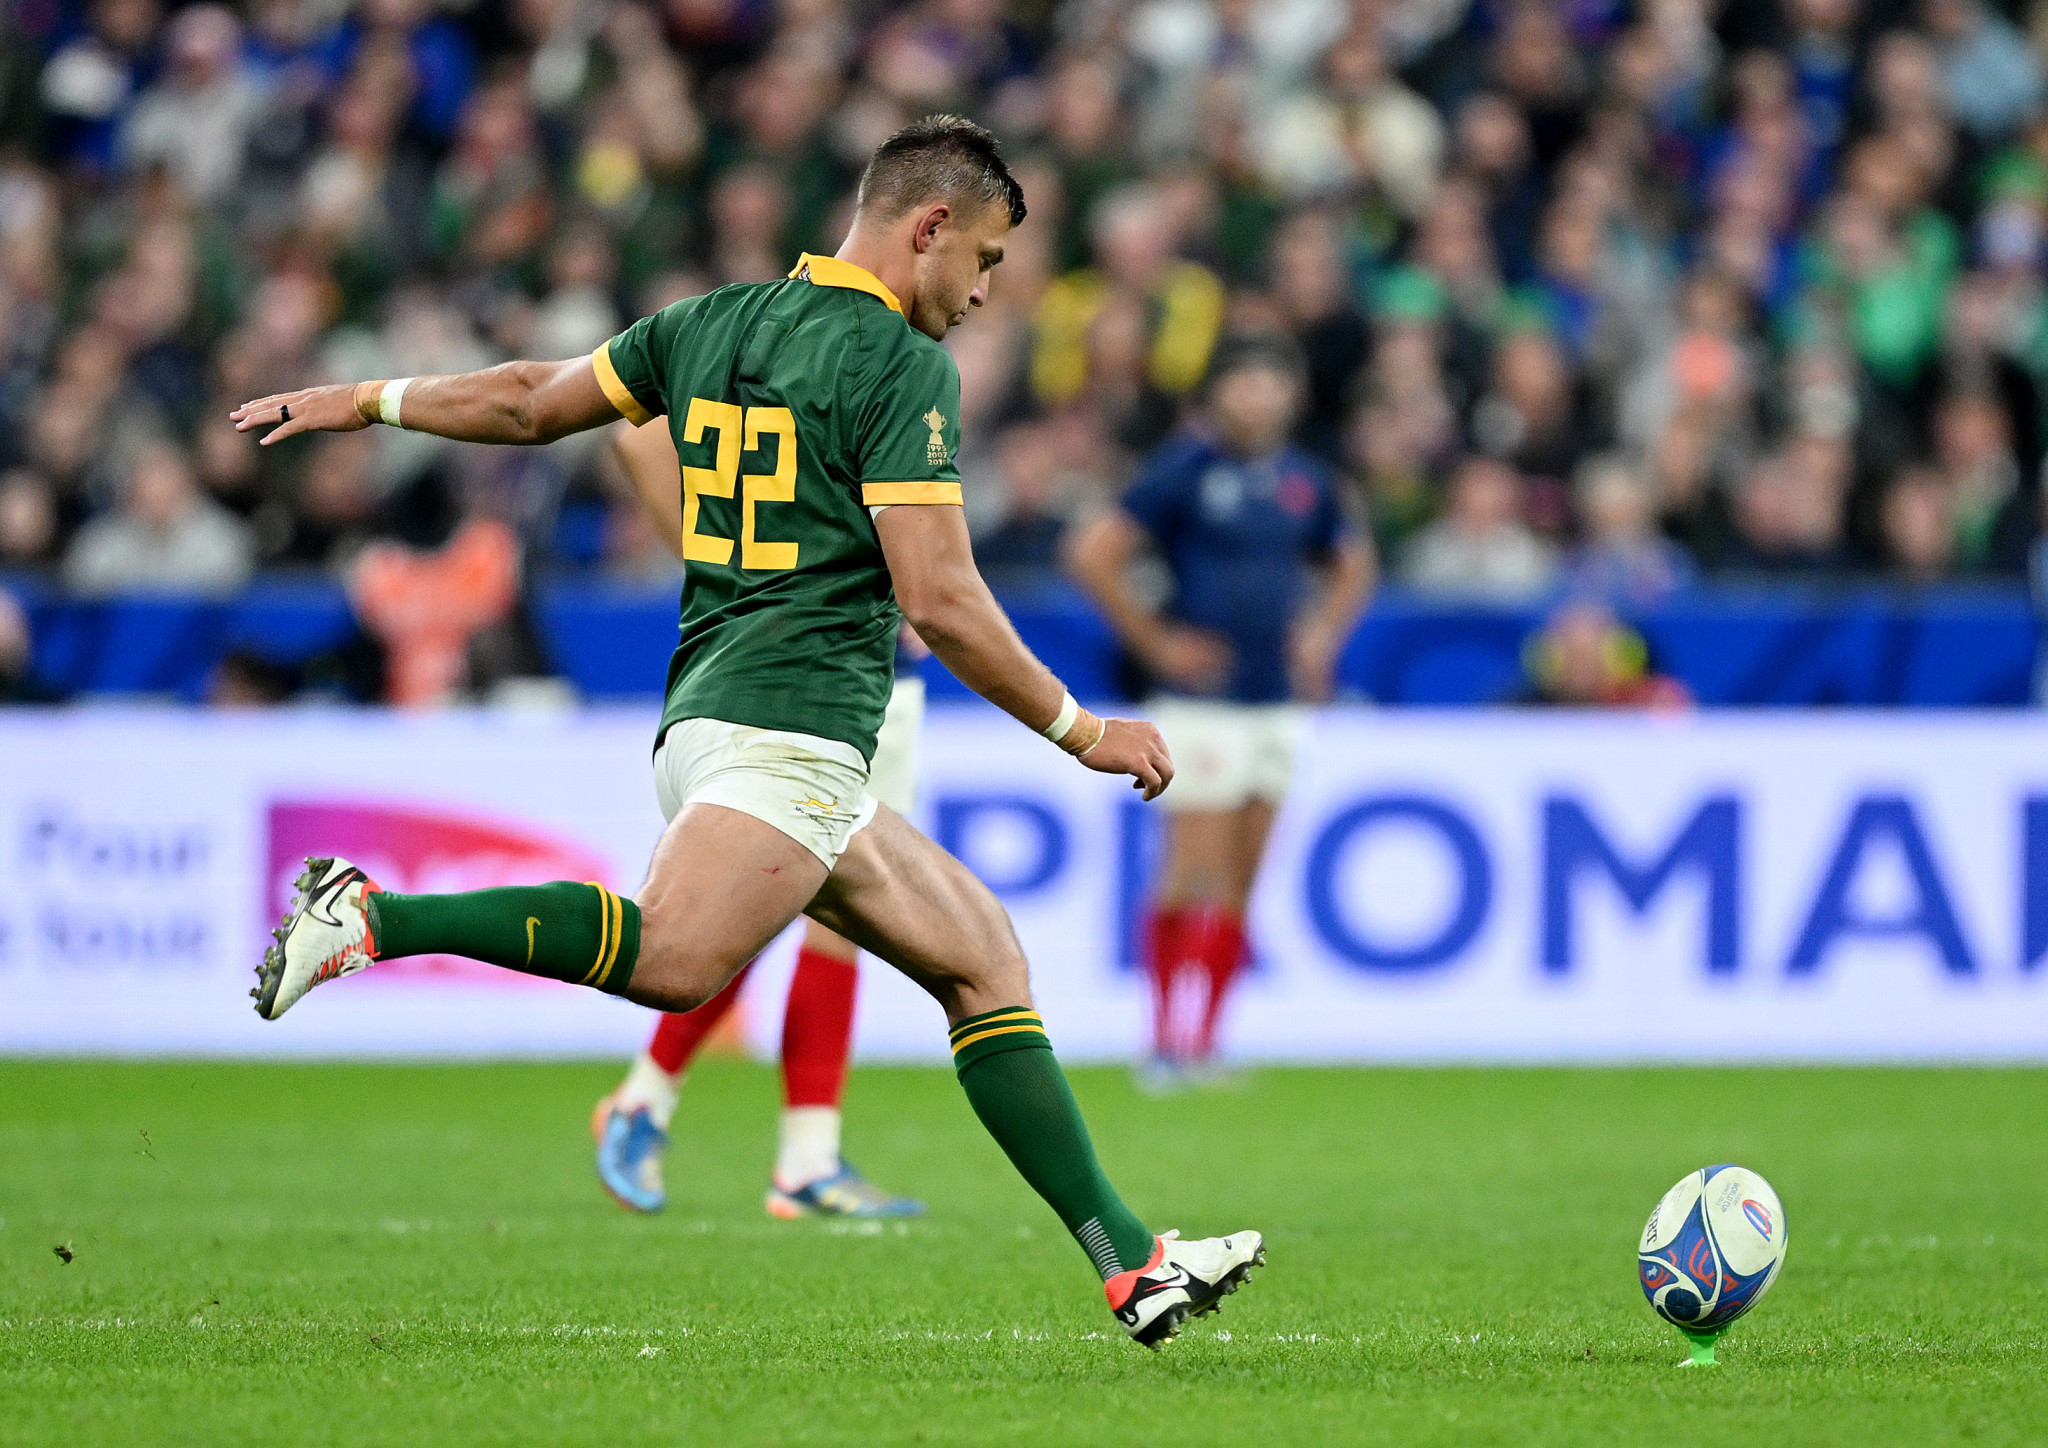 Handre Pollard's late penalty gave South Africa enough distance to see out a narrow win over France ©Getty Images